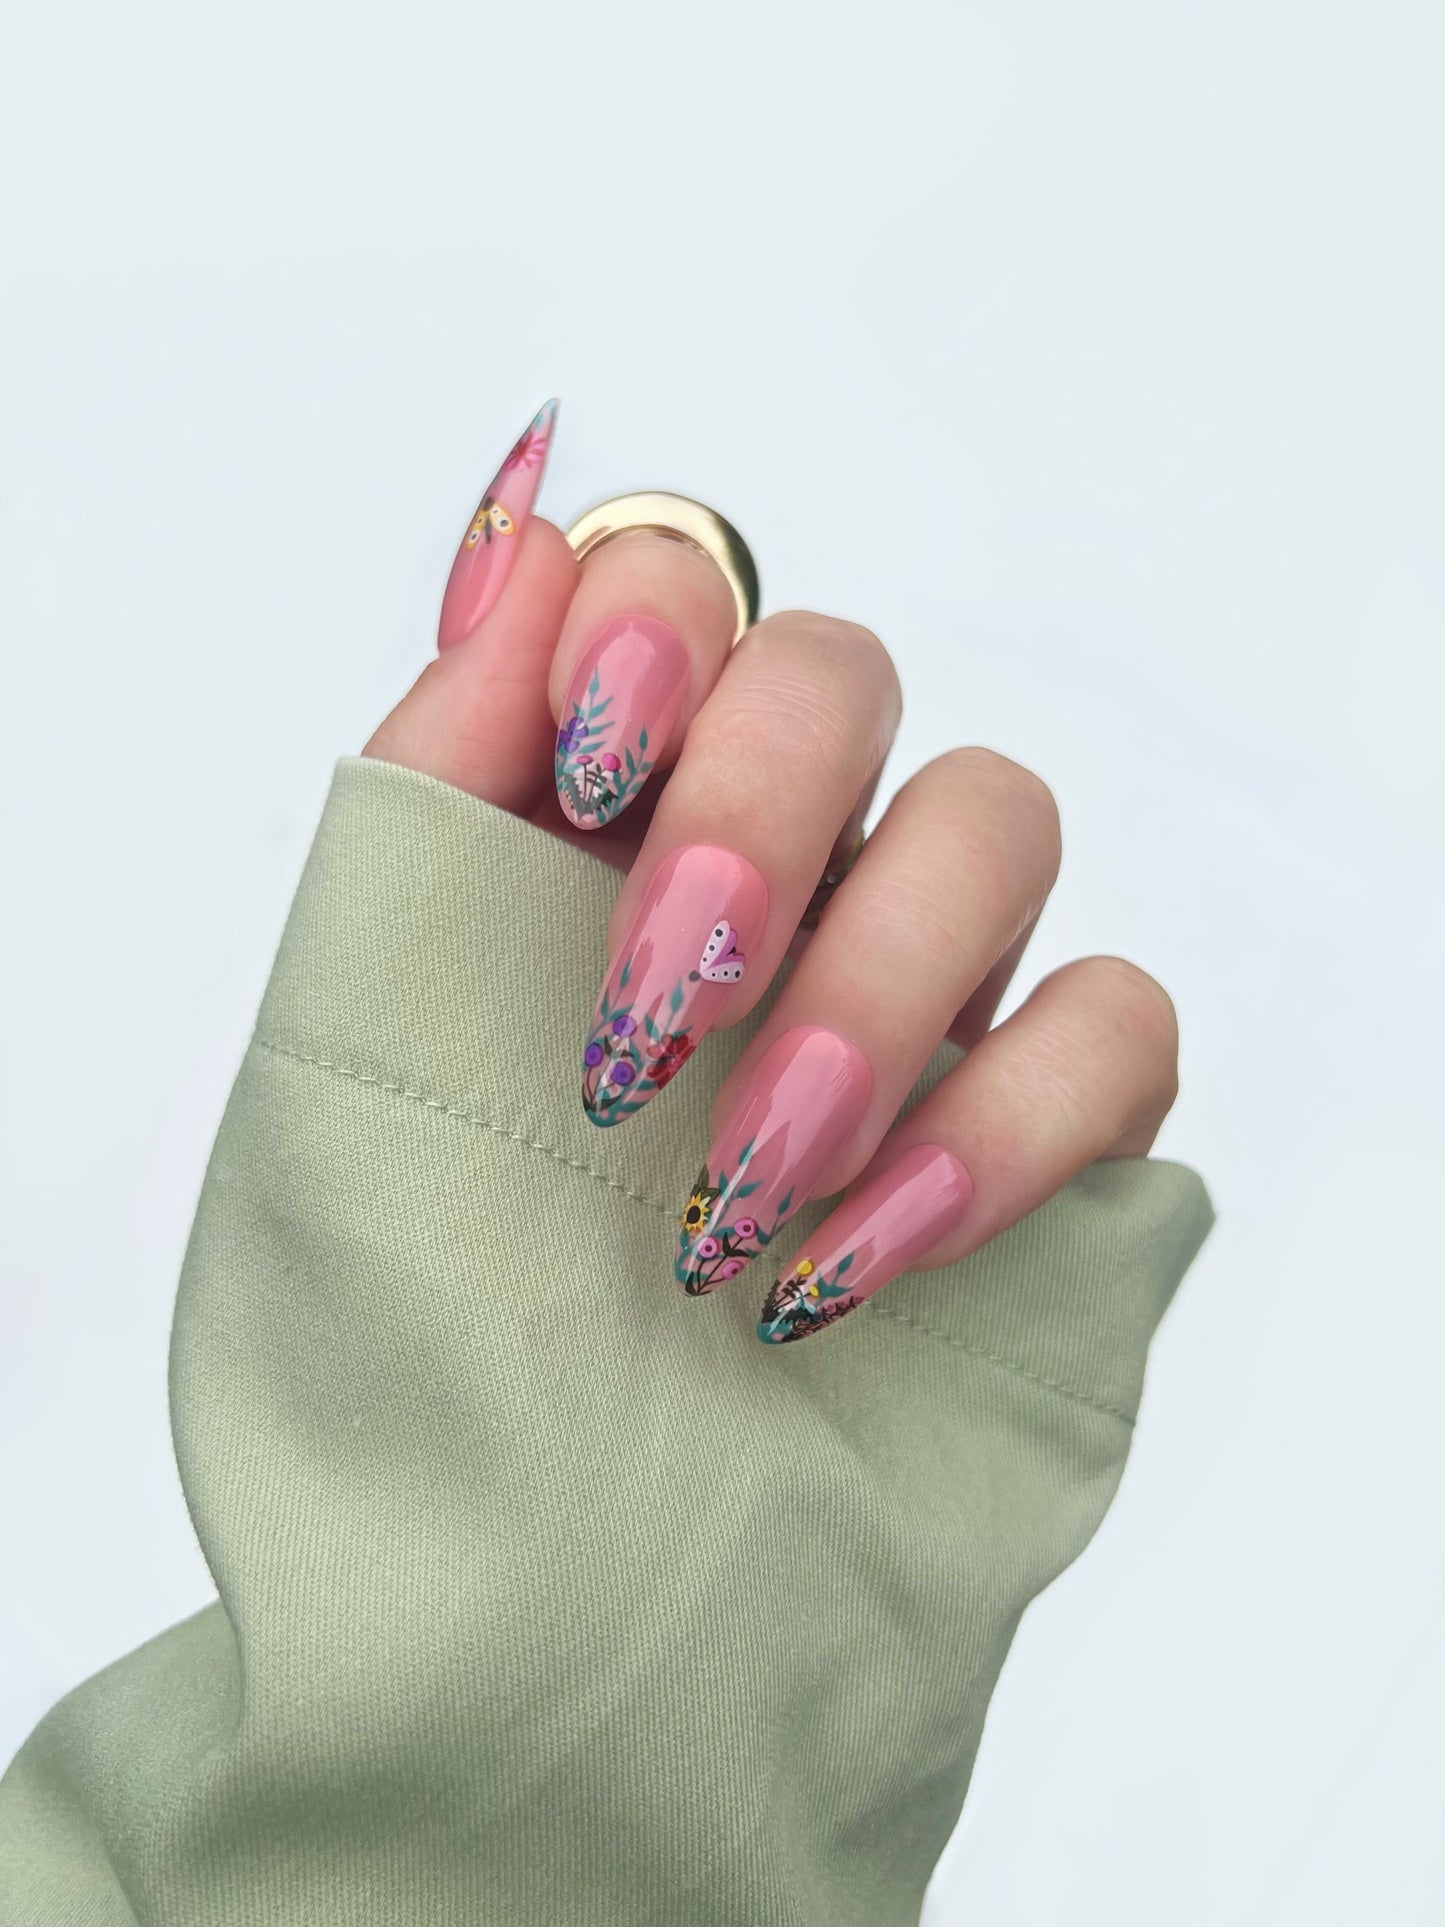 Wildflower nail art stickers on nude nails